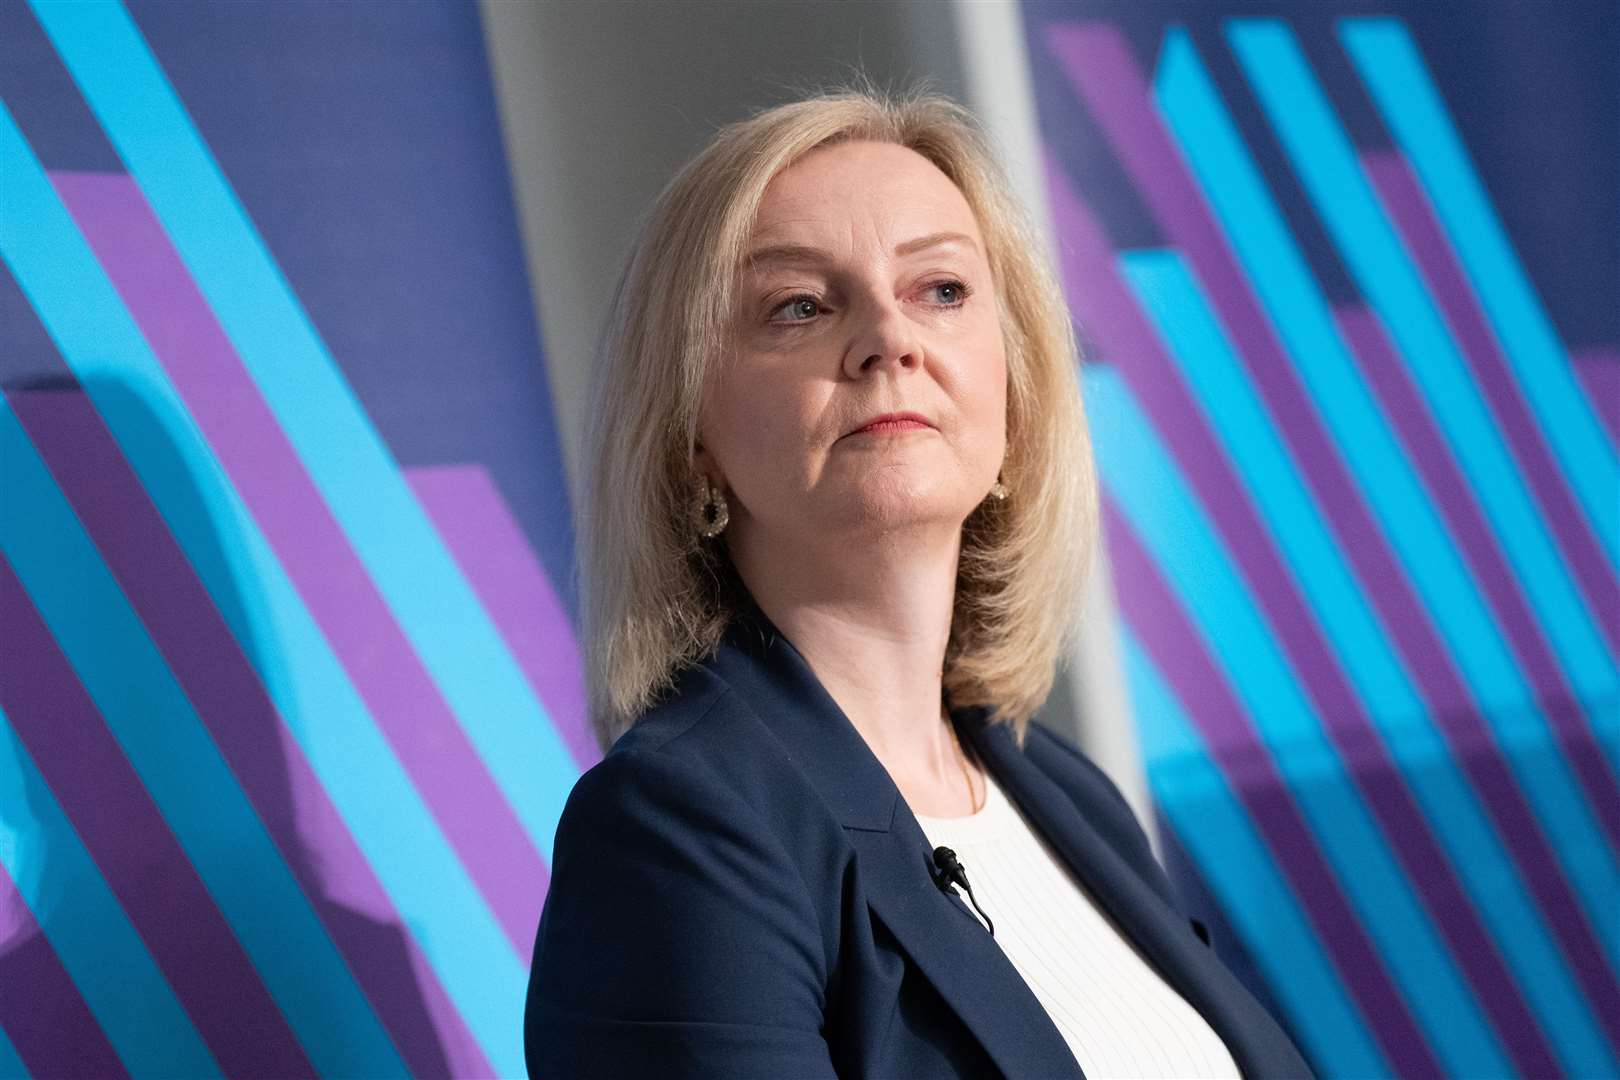 Liz Truss said she was ‘disappointed’ that a Conservative government was bringing forward a smoking ban (Stefan Rousseau/PA)